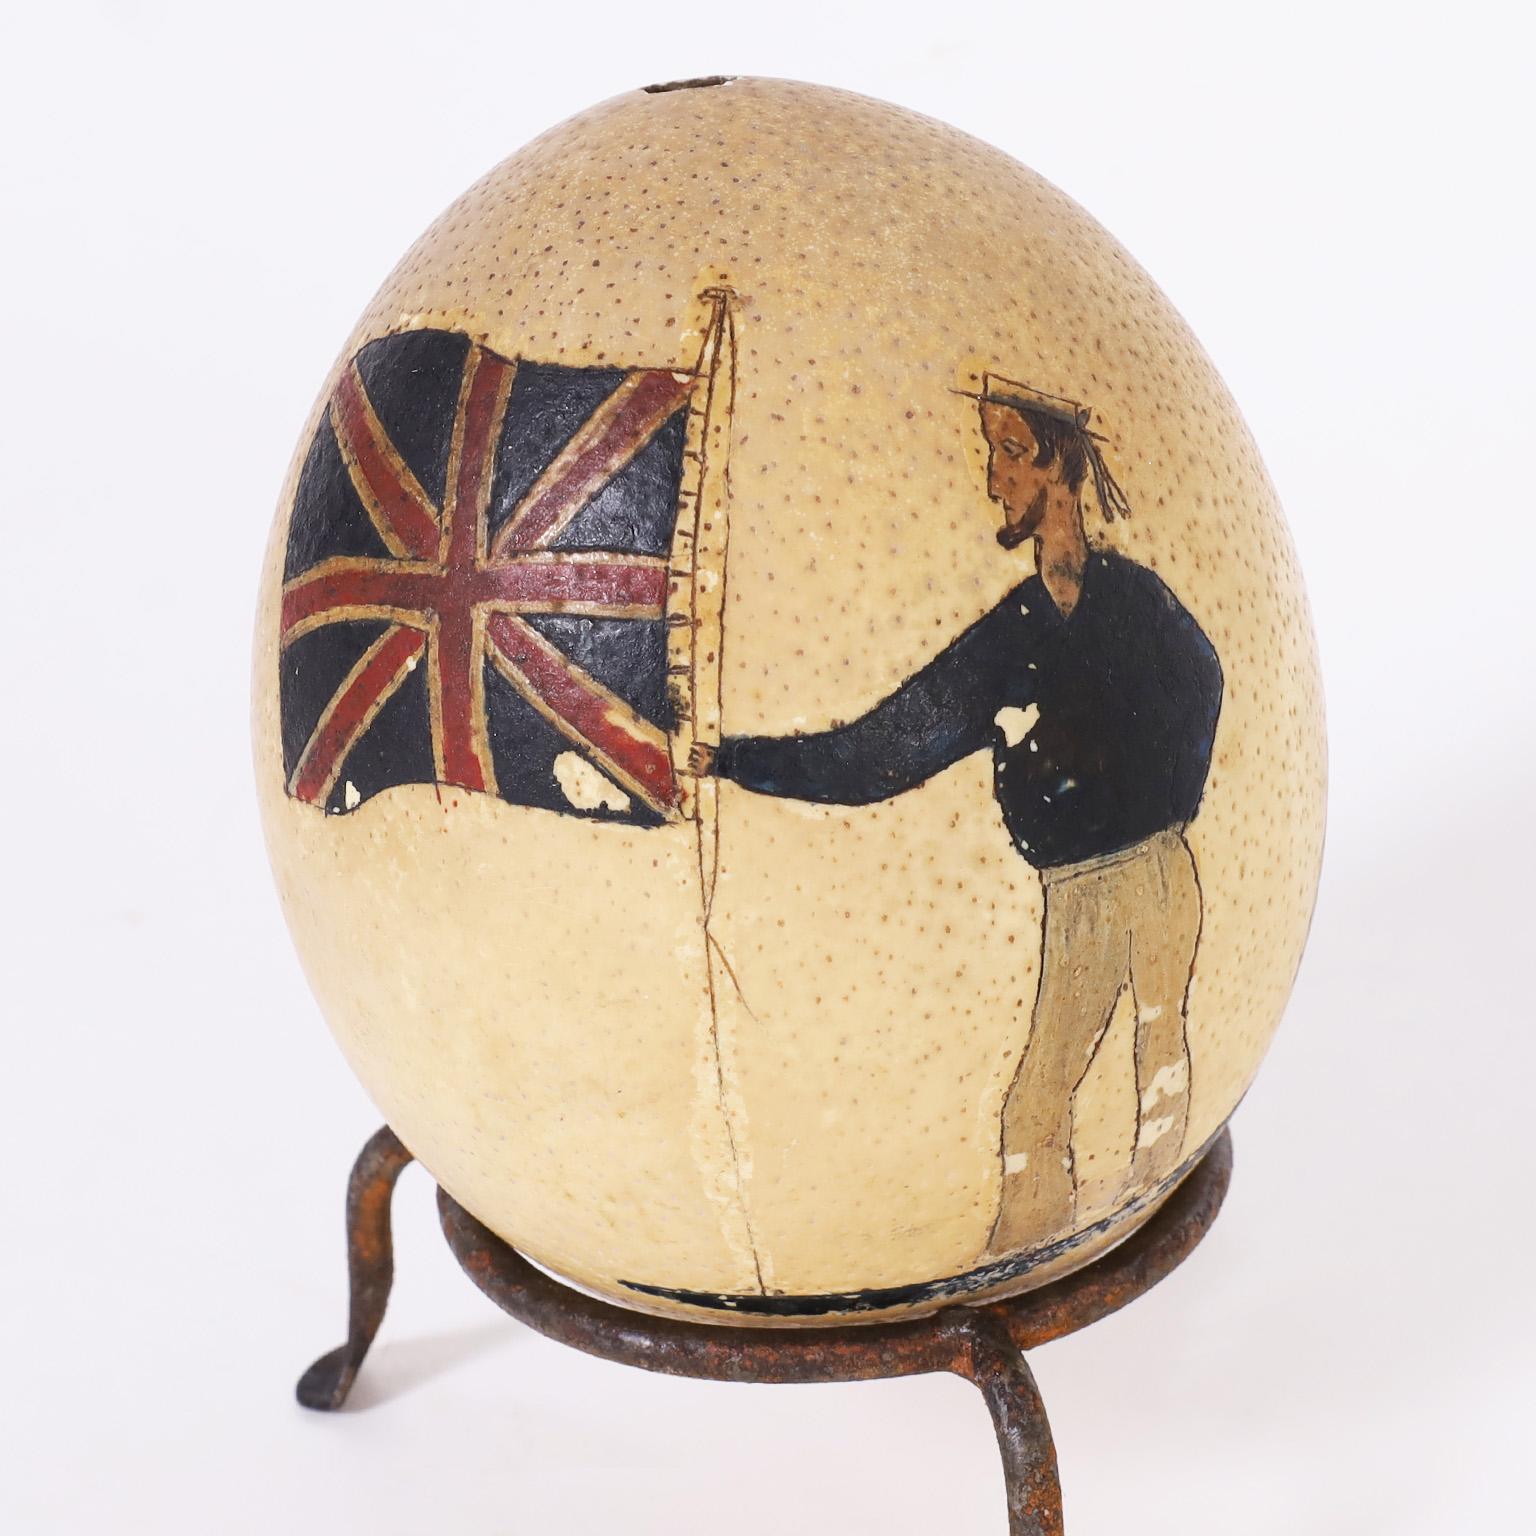 Ostrich Eggshell Pair of Painted English Commemorative Ostrich Eggs, Priced Individually